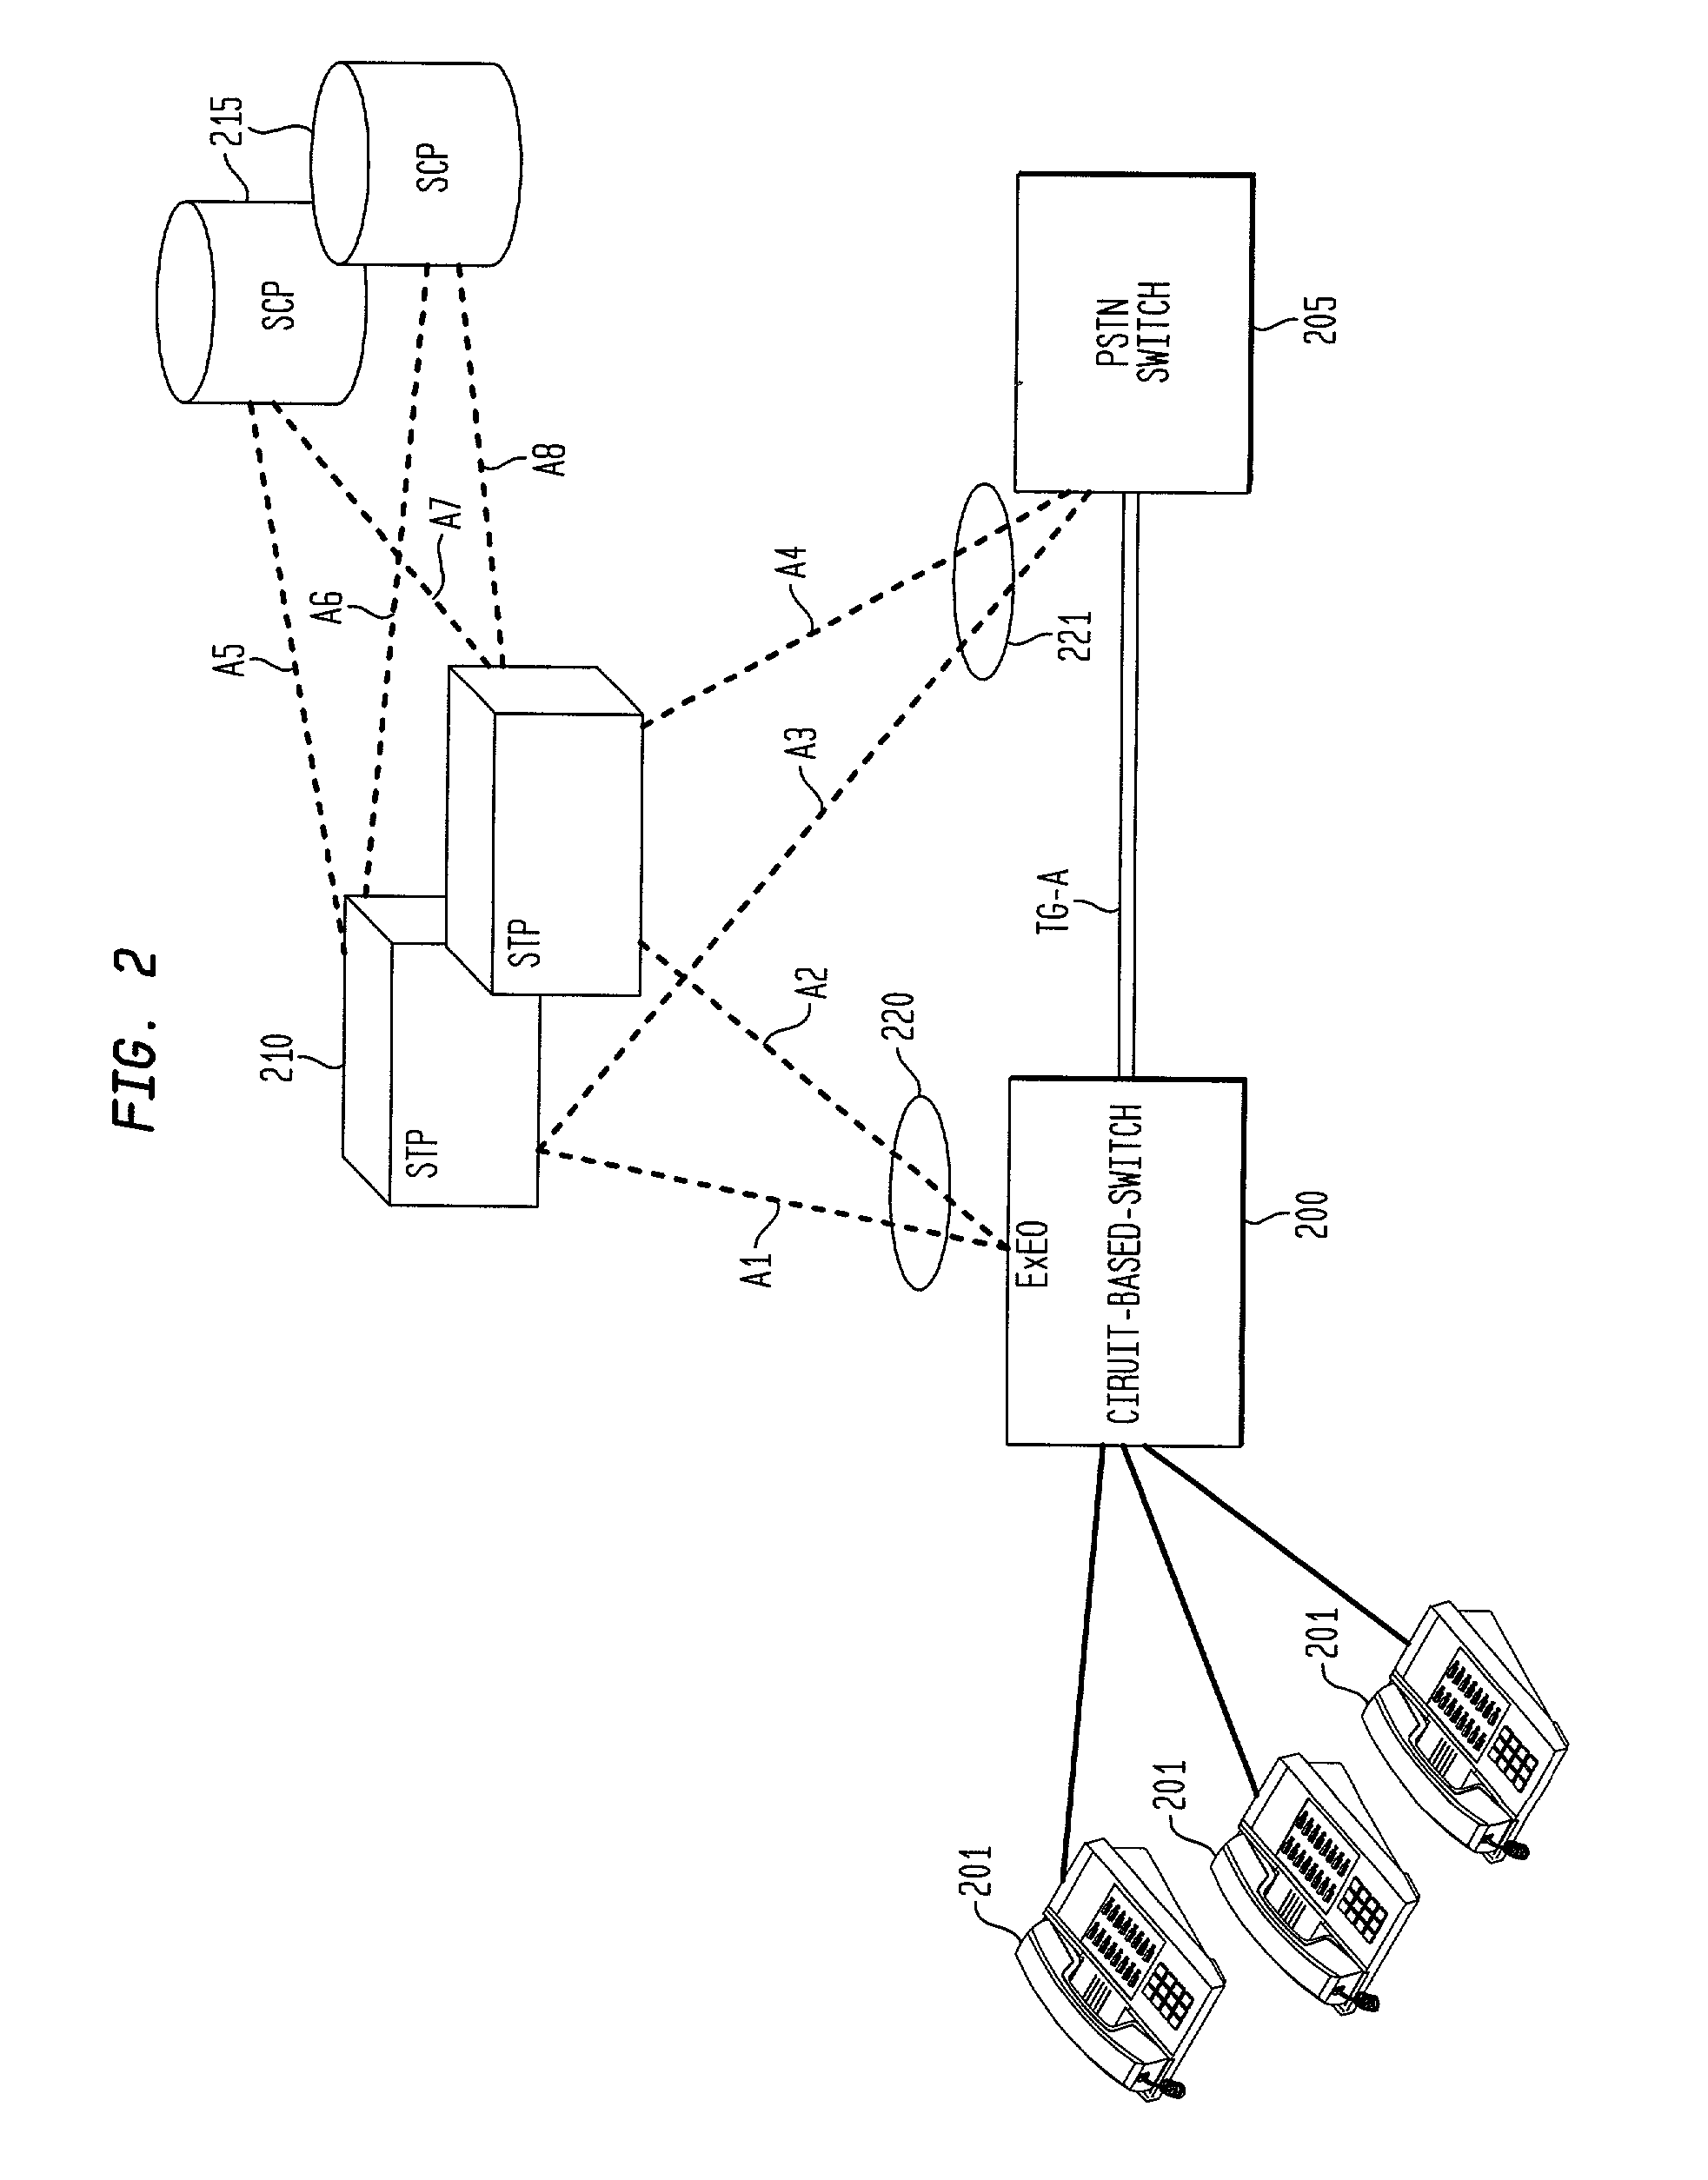 Method and apparatus for sharing point codes in a network